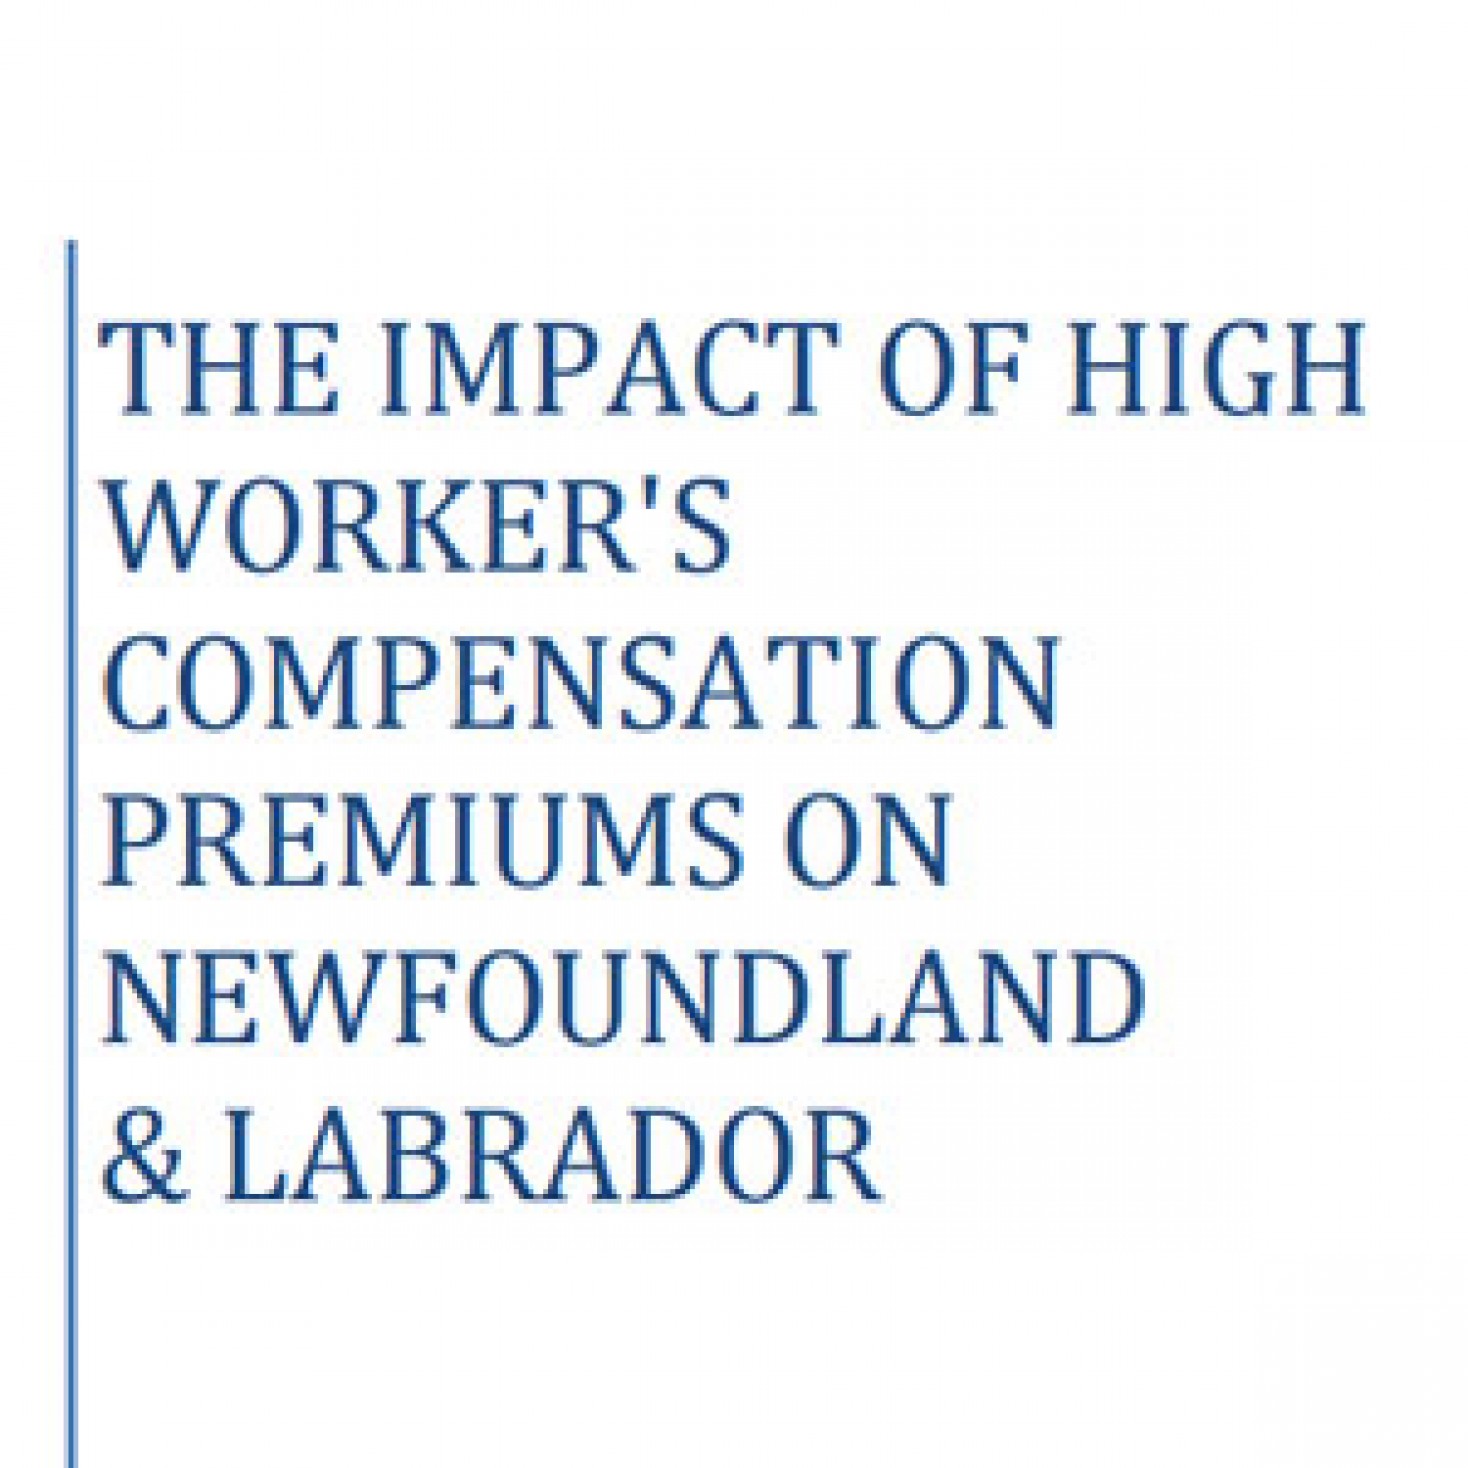 The Impact of High Worker’s Compensation Premiums on Newfoundland & Labrador